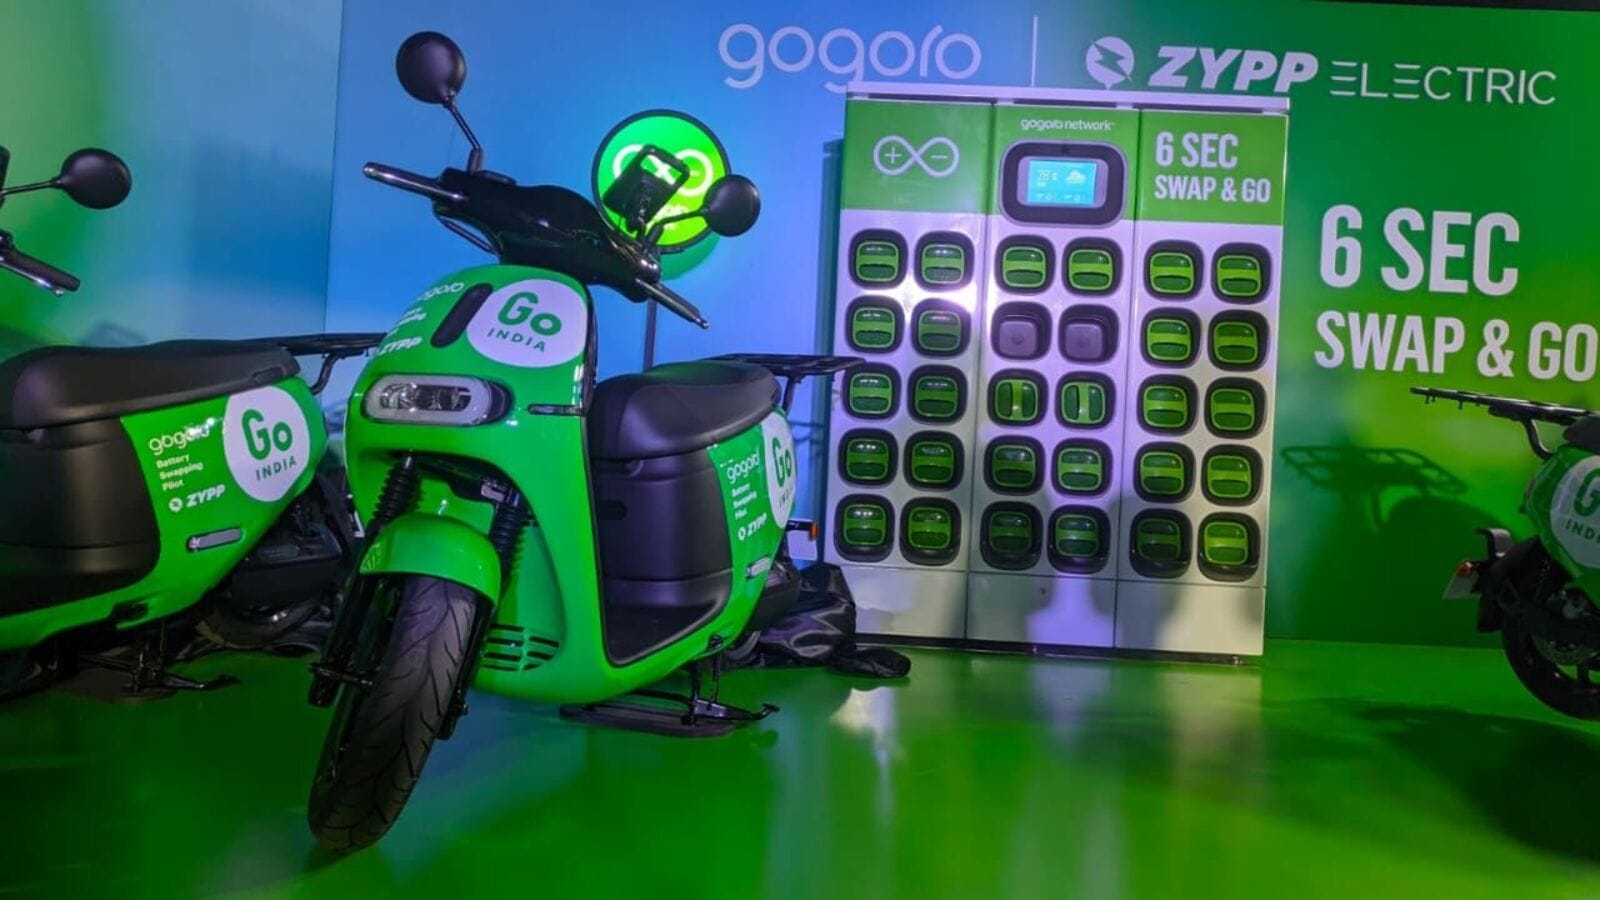 Taiwan-based Gogoro launches battery-swapping pilot service in India ...